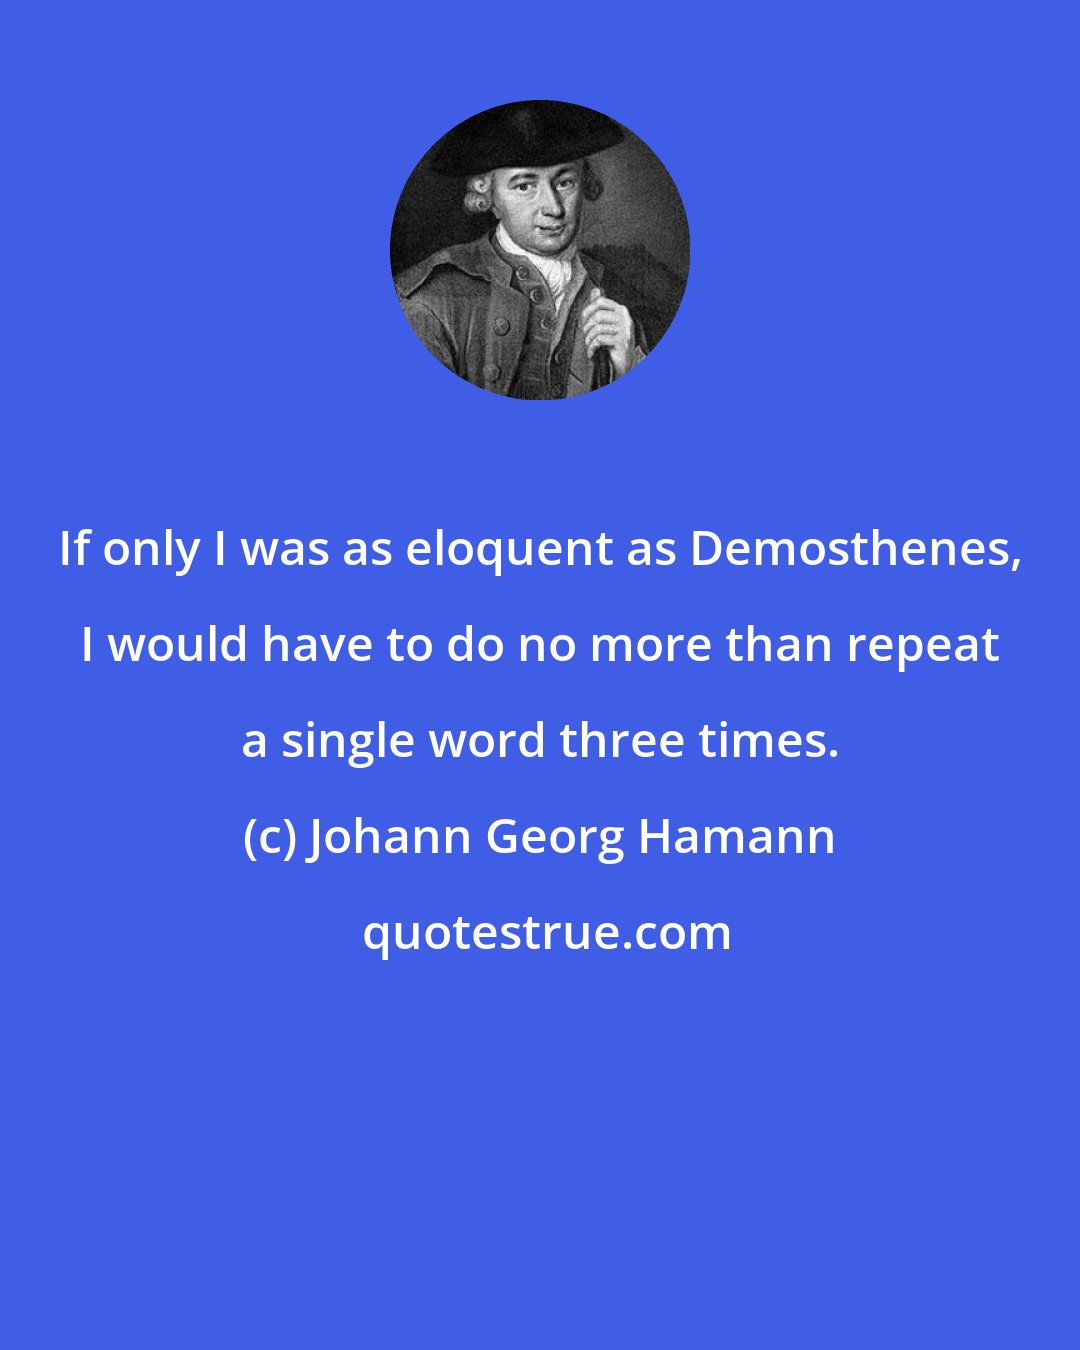 Johann Georg Hamann: If only I was as eloquent as Demosthenes, I would have to do no more than repeat a single word three times.